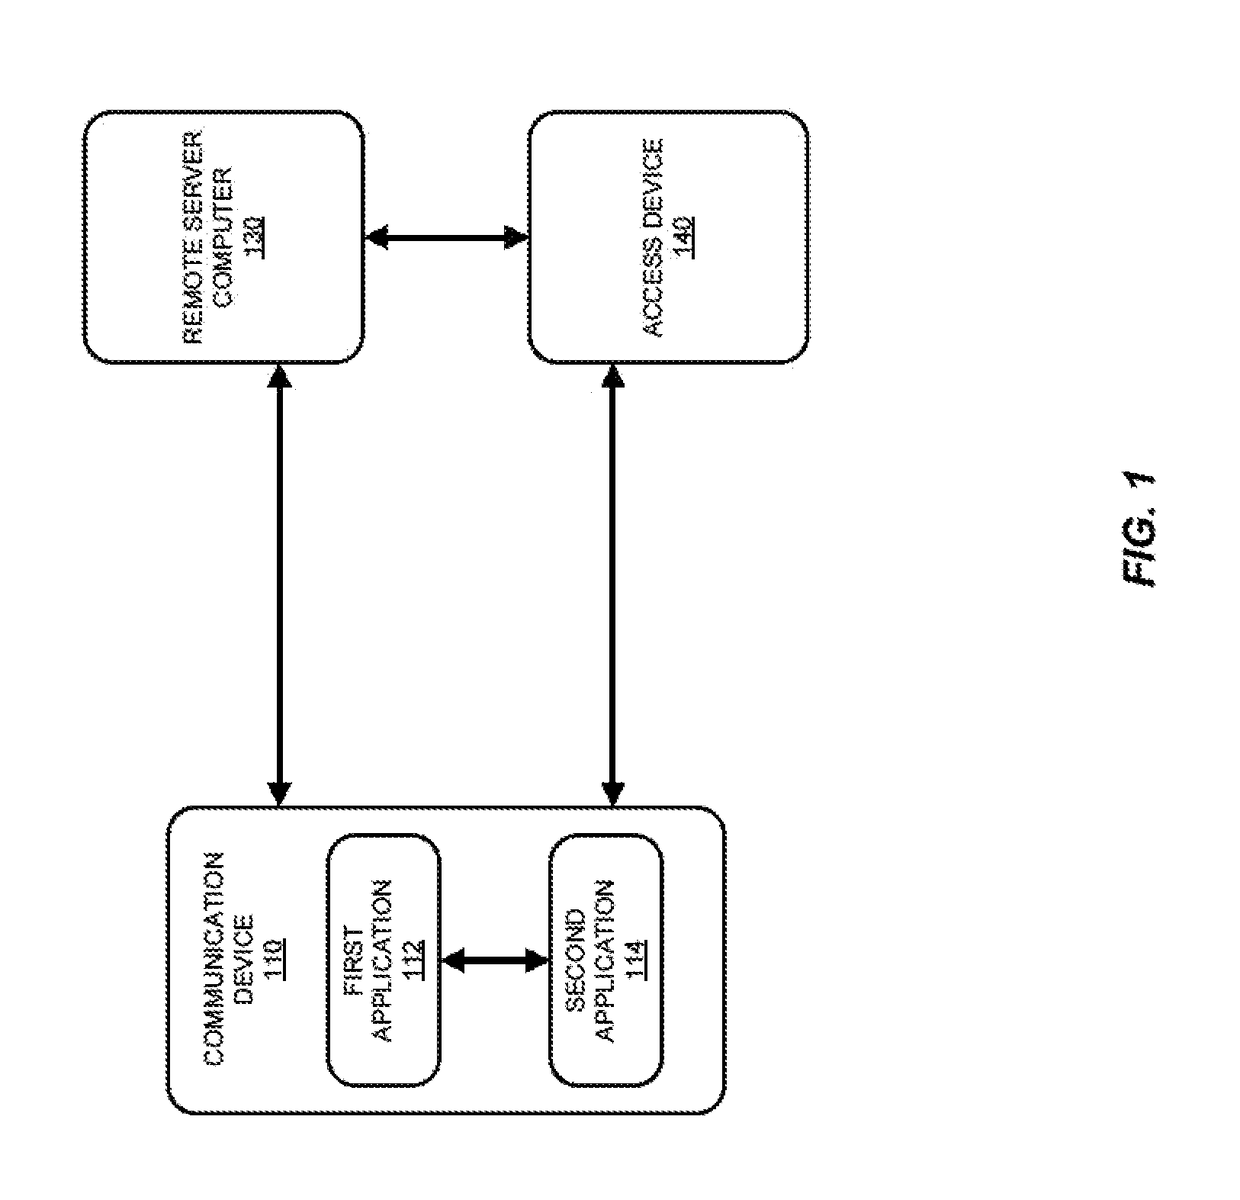 Systems and methods for device push provisioning